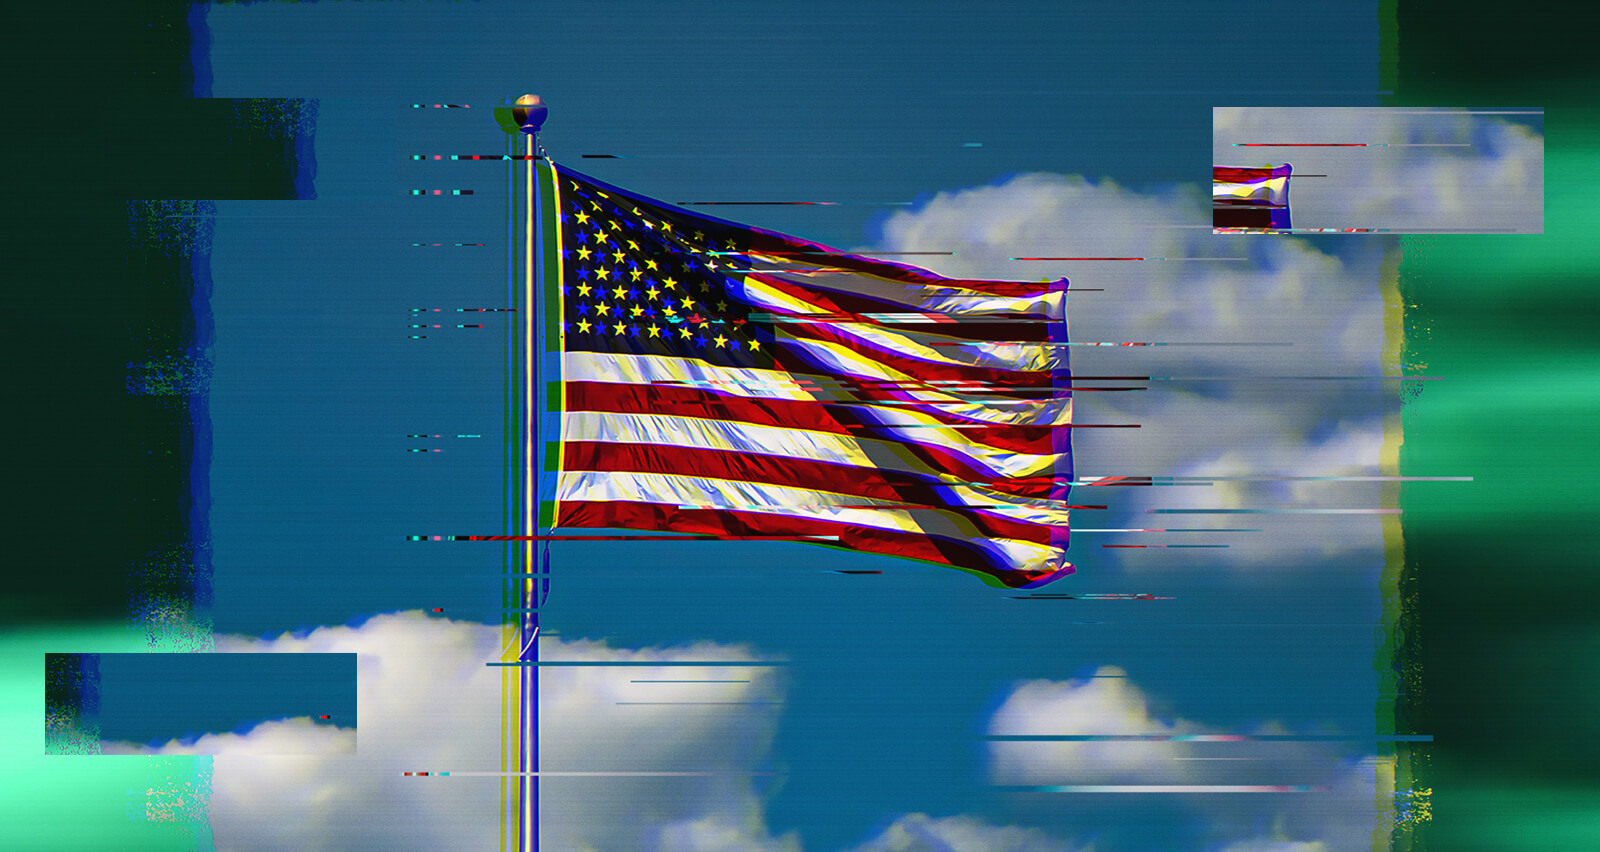 Man of the Law Featured Image - US Flag flying in the wind.